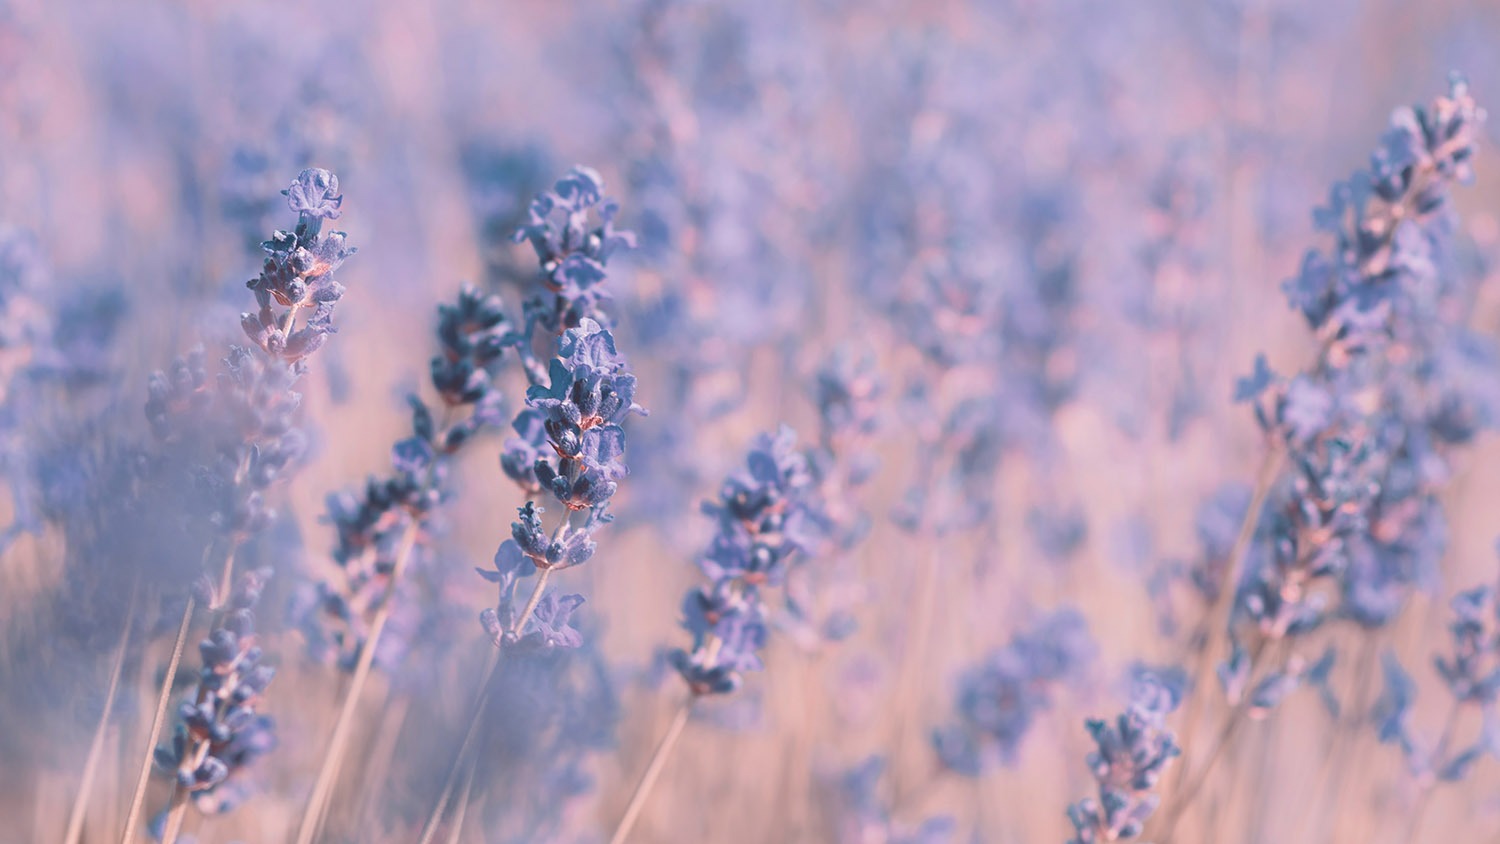 LAVENDER, A PLANT WITH A THOUSAND FRAGRANT VIRTUES